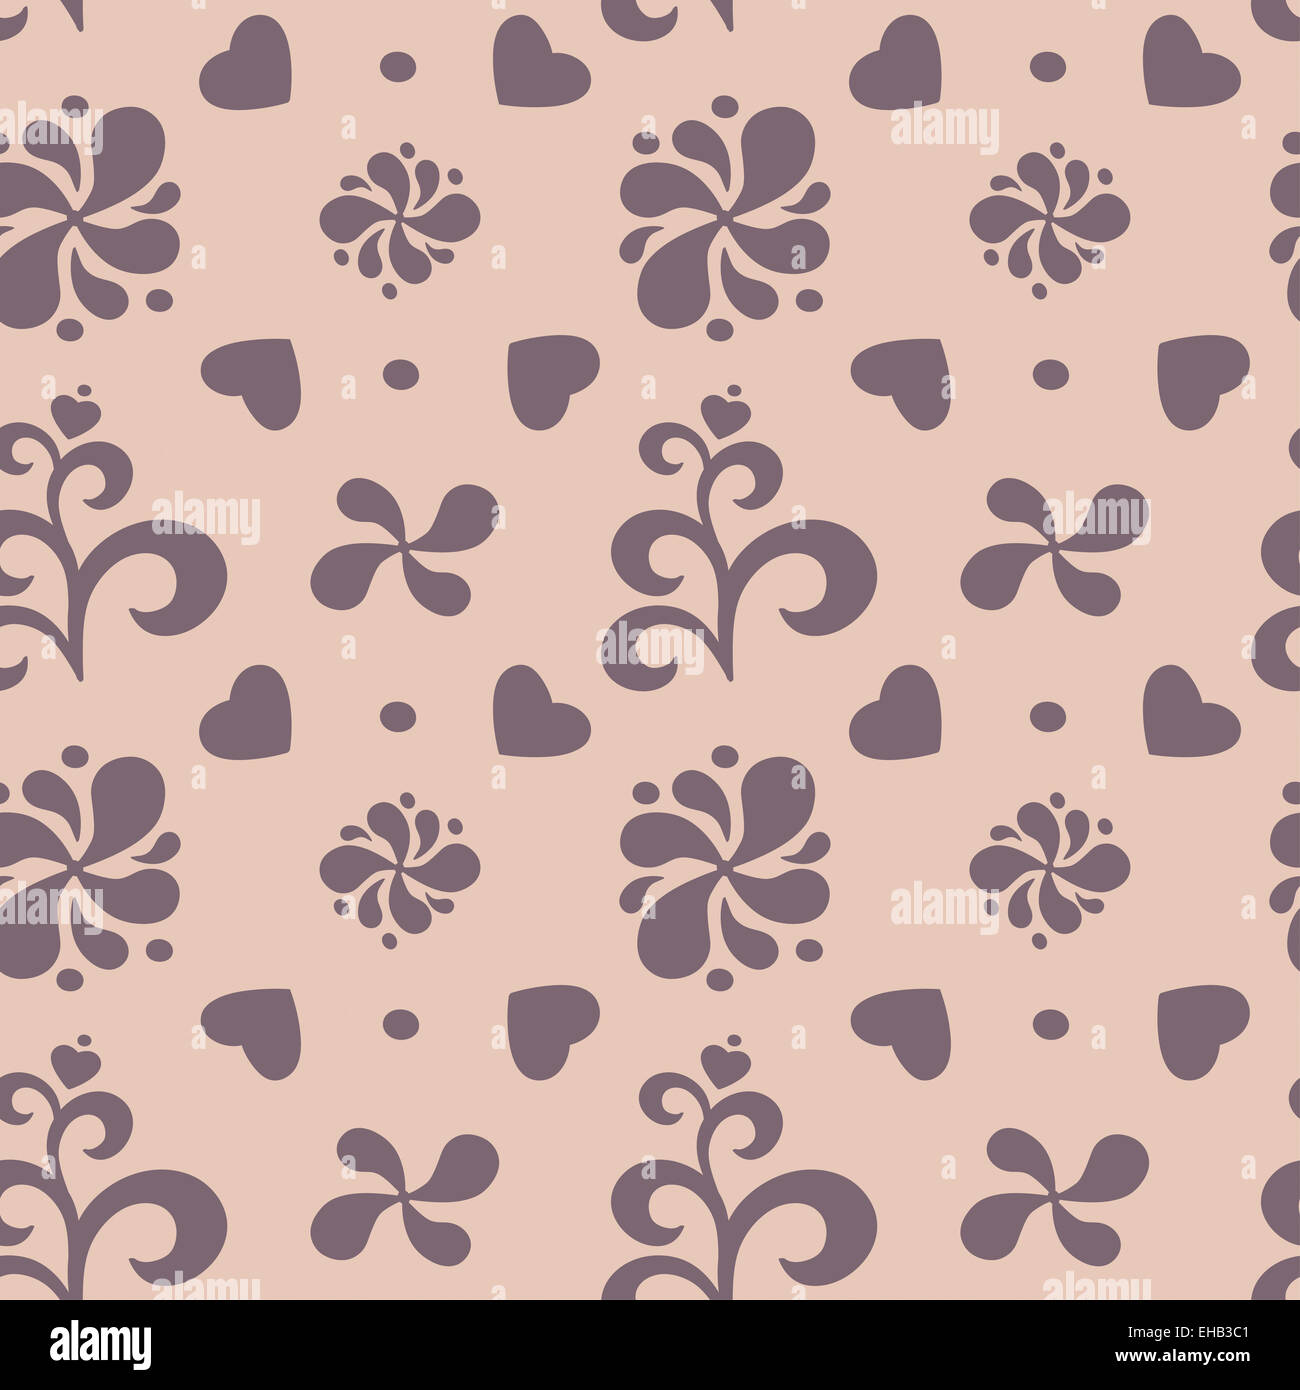 Abstract floral seamless pattern on beige background. Stock Photo